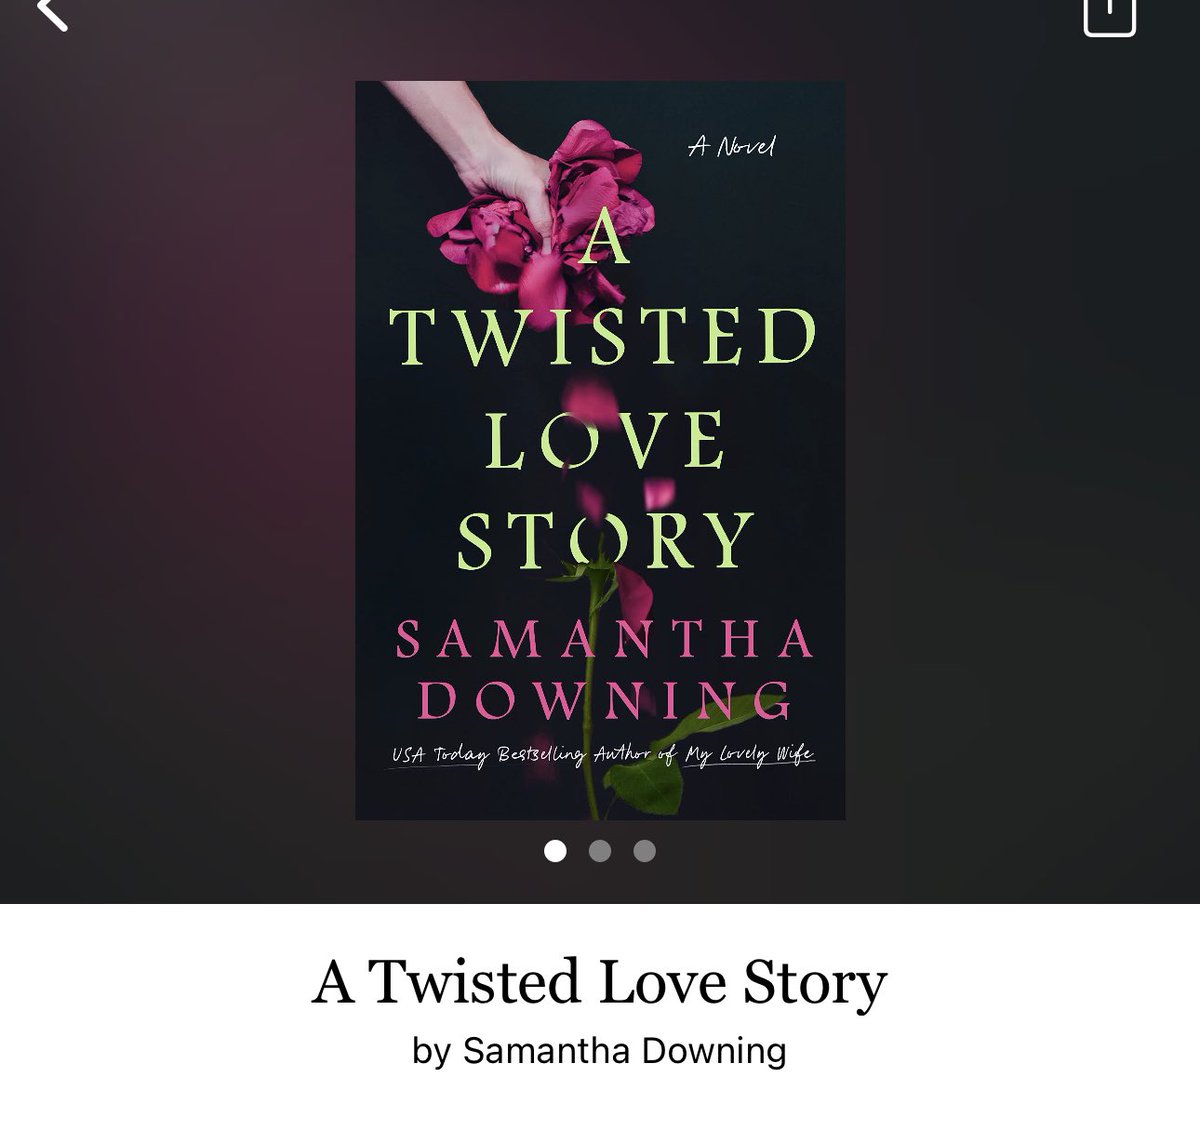 A Twisted Love Story by Samantha Downing 

#ATwistedLoveStory by #SamanthaDowning #5360 #77chapters #390pages #august2023 #903of400 #NewRelease #Audiobook #120for30 #10houraudiobook #clearingoffreadingshelves #whatsnext #readitquick